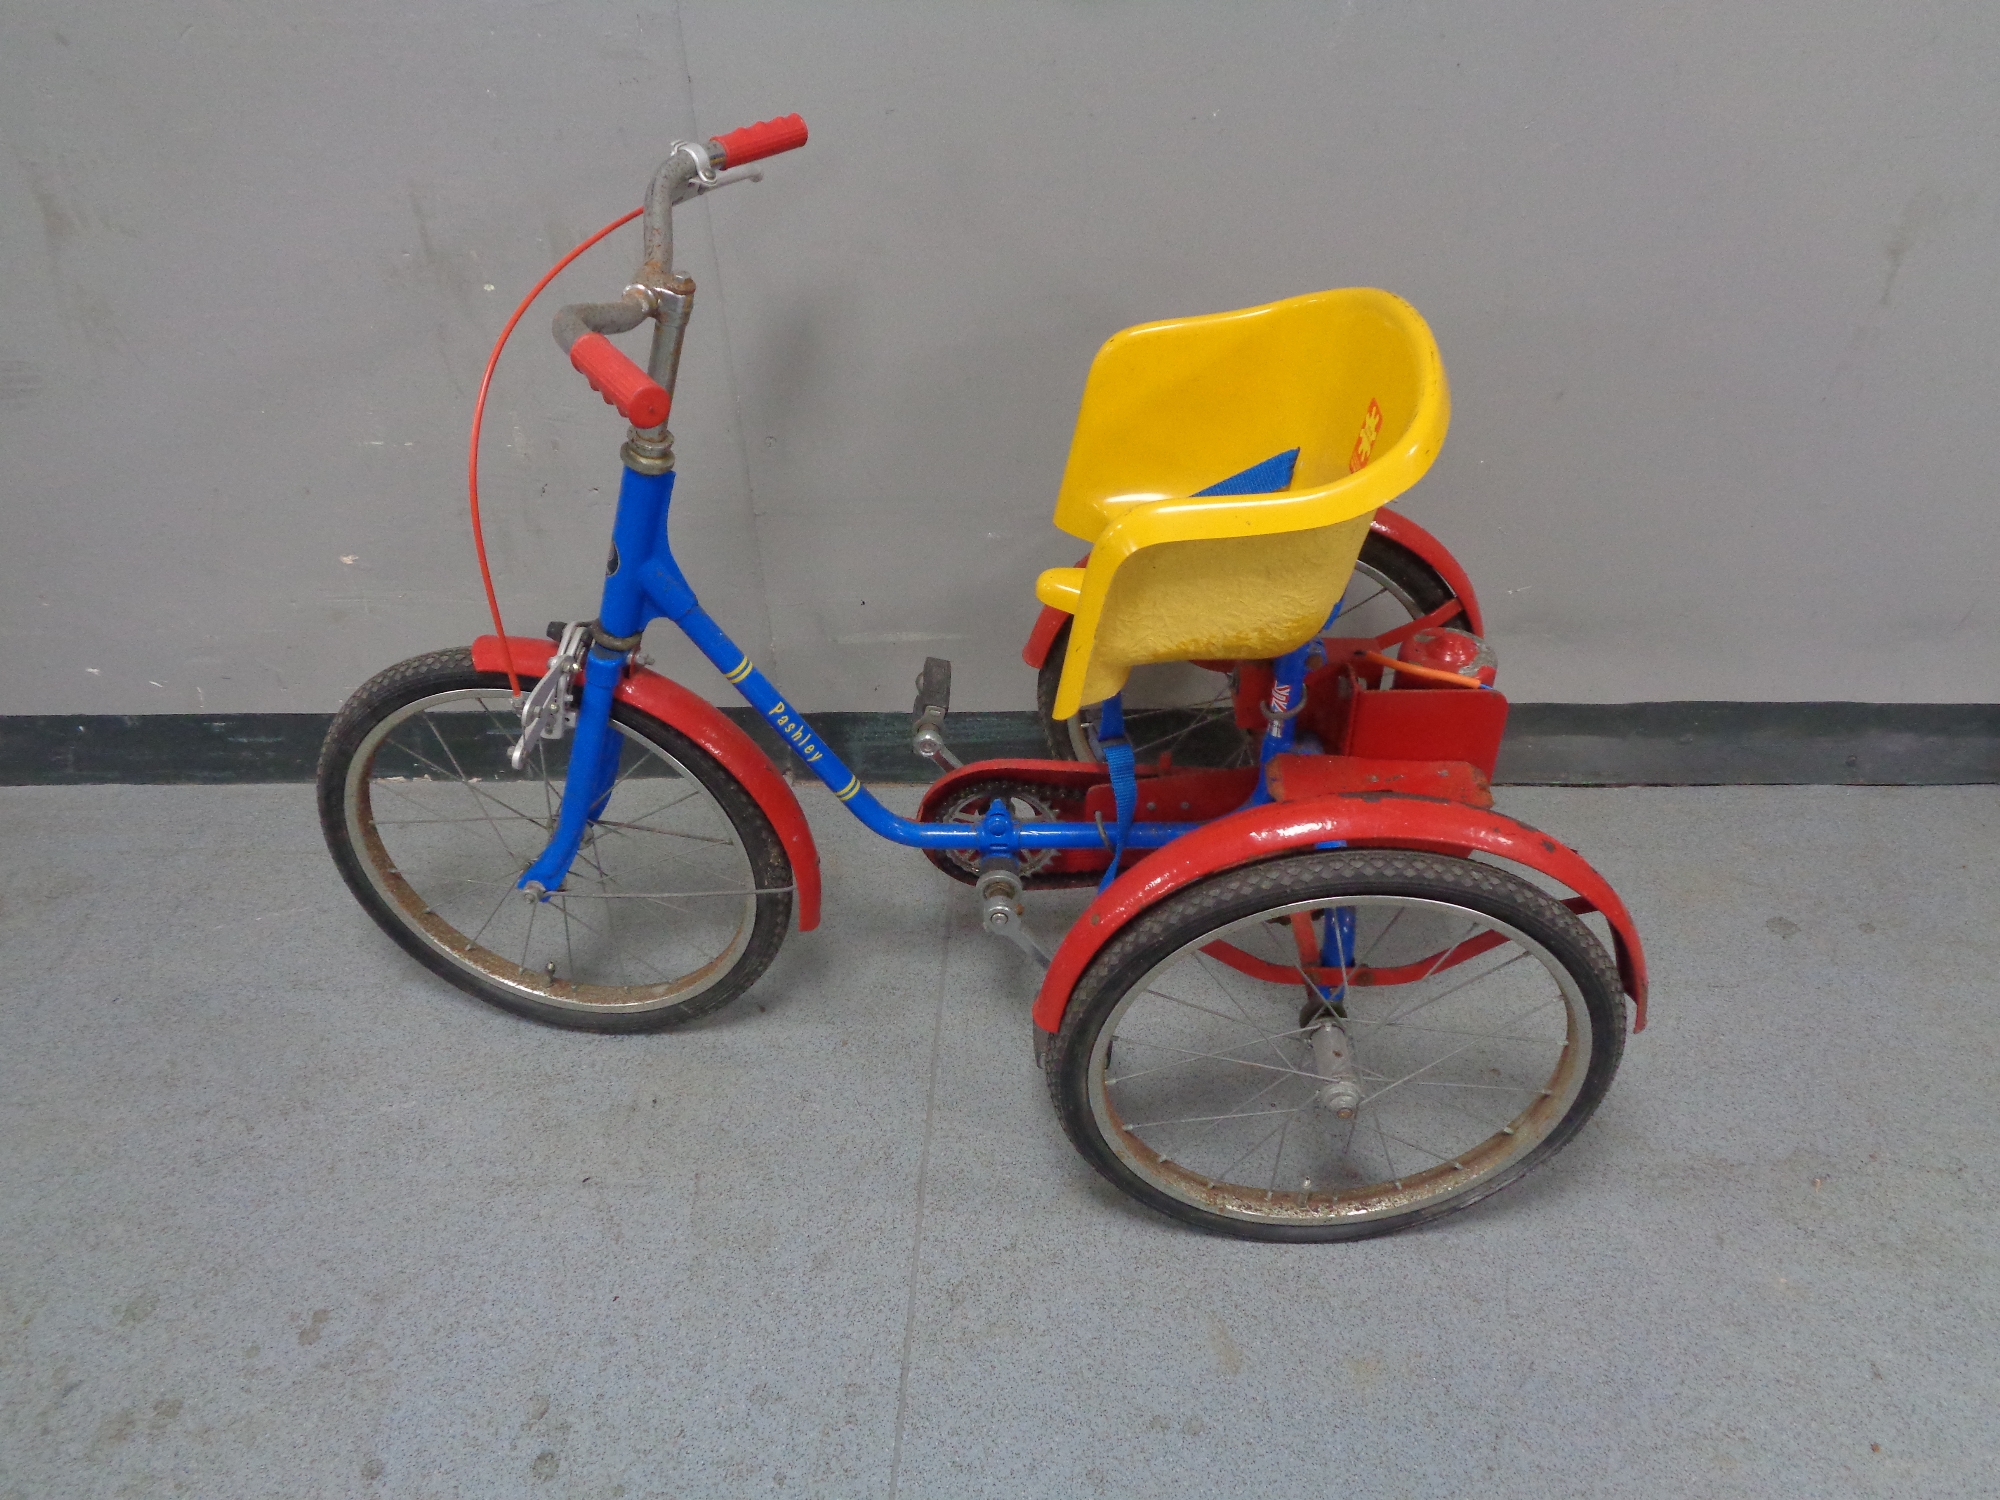 A 20th century Pashley child's tricycle